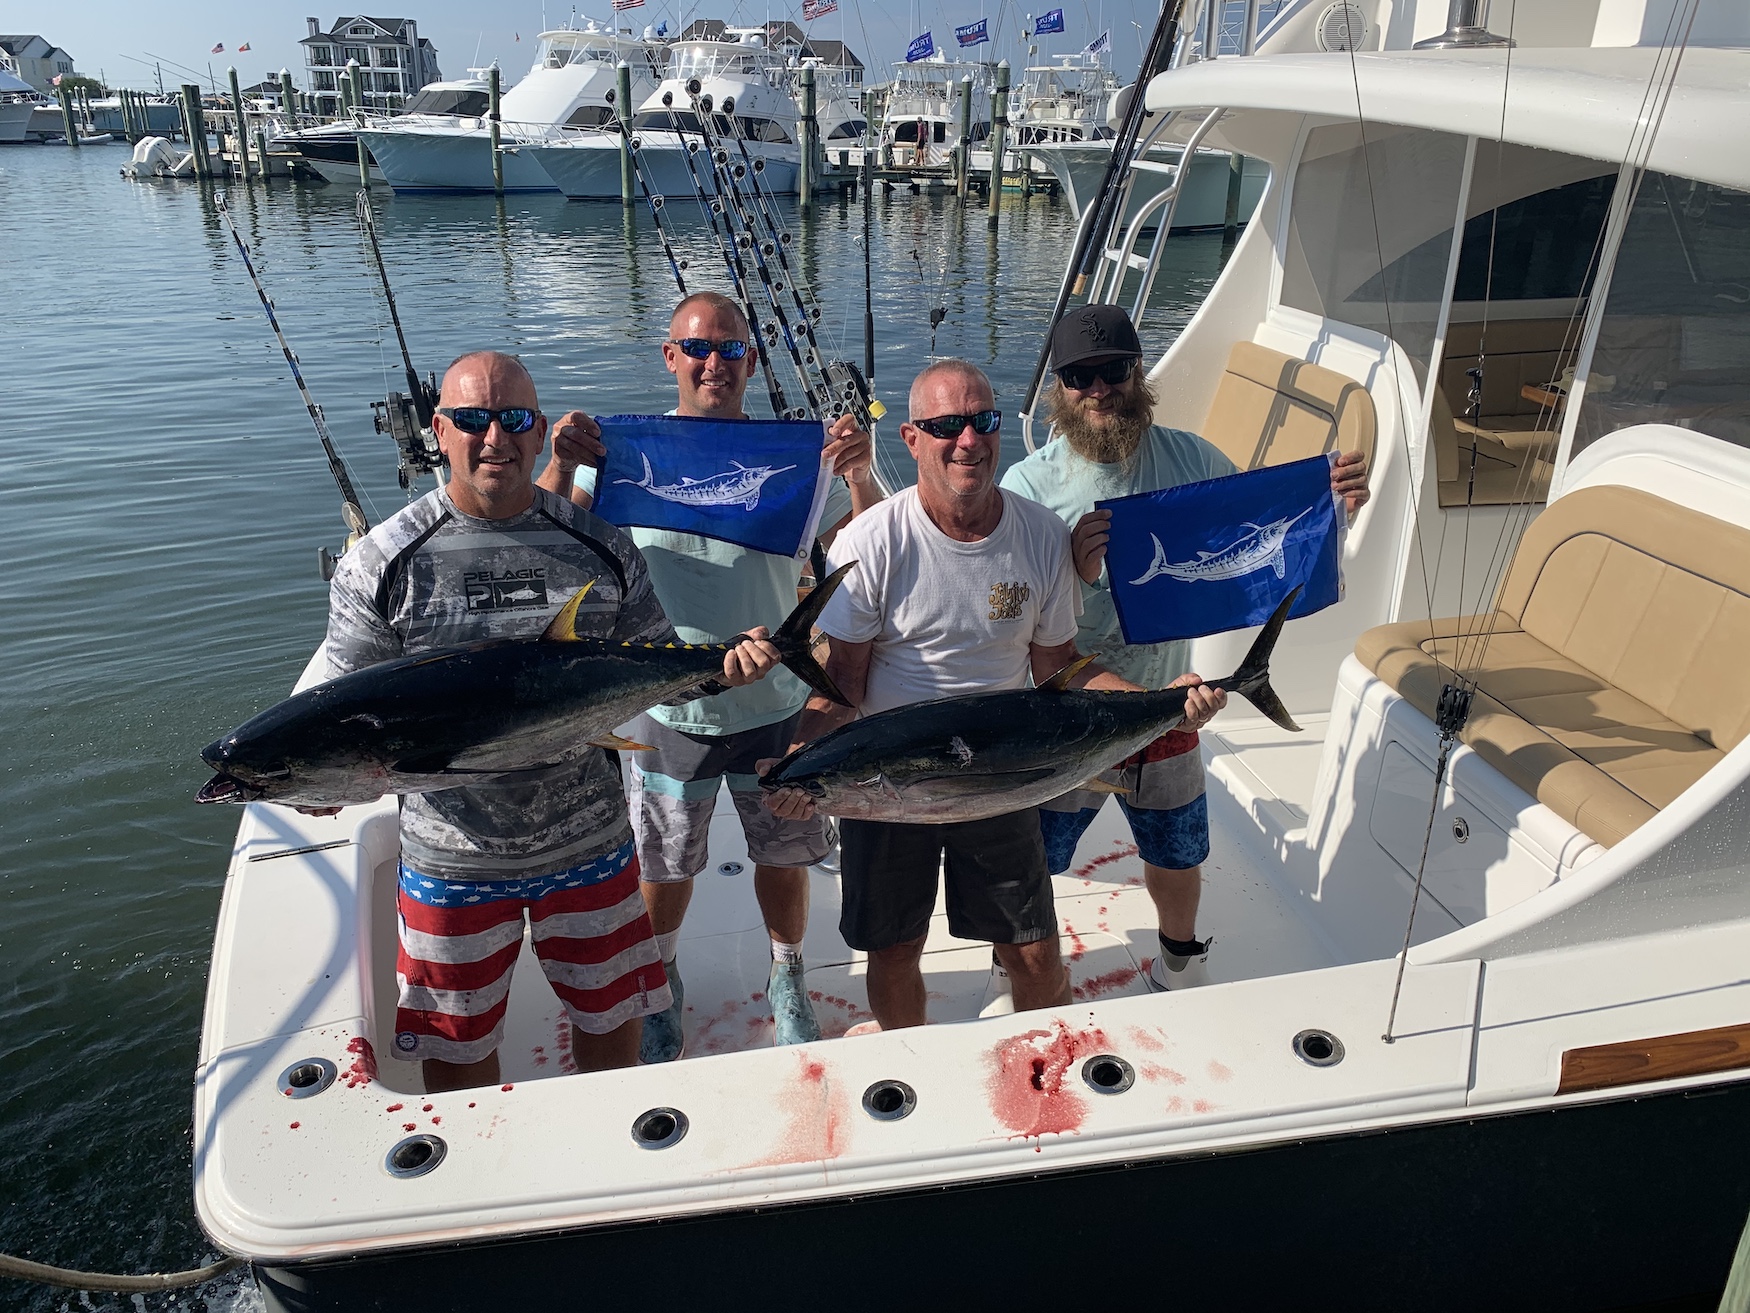 Surf Fishing and Charter Fishing in Ocean City, MD